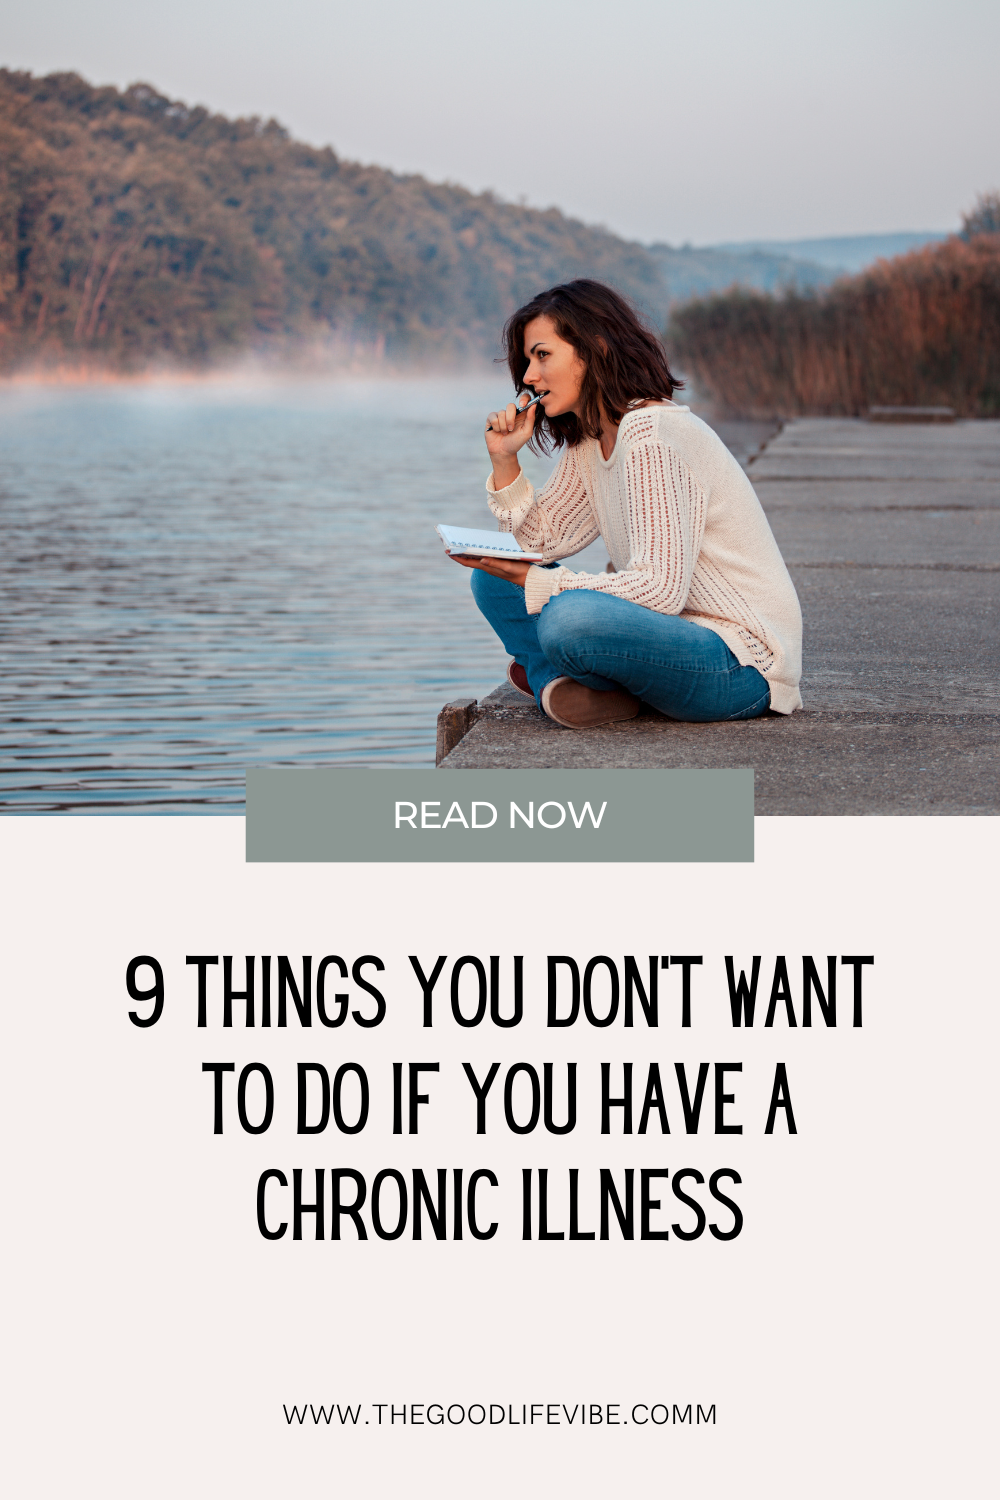 9 Things You Don't Want To Do If You Have A Chronic Illness